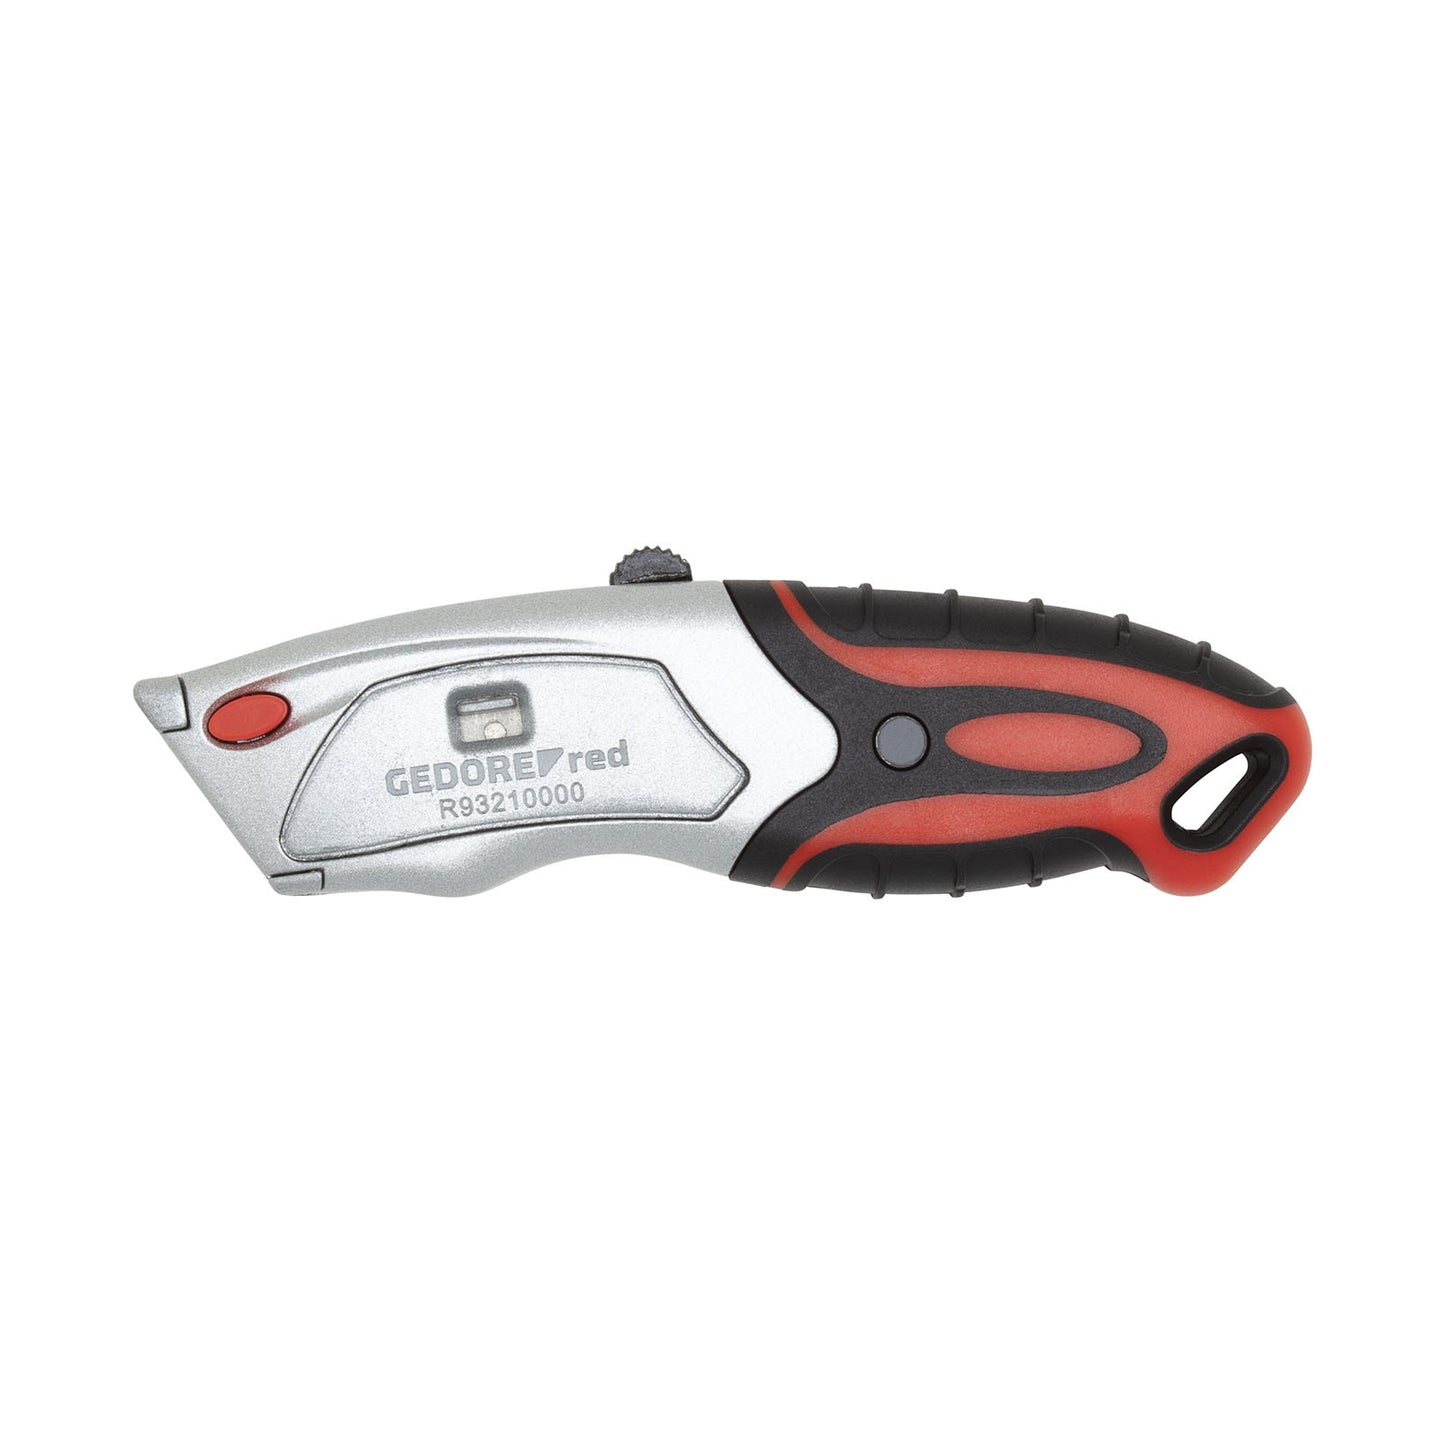 GEDORE red R93210000 - Professional cutter with 6 blades and multi-component handle (3301598)